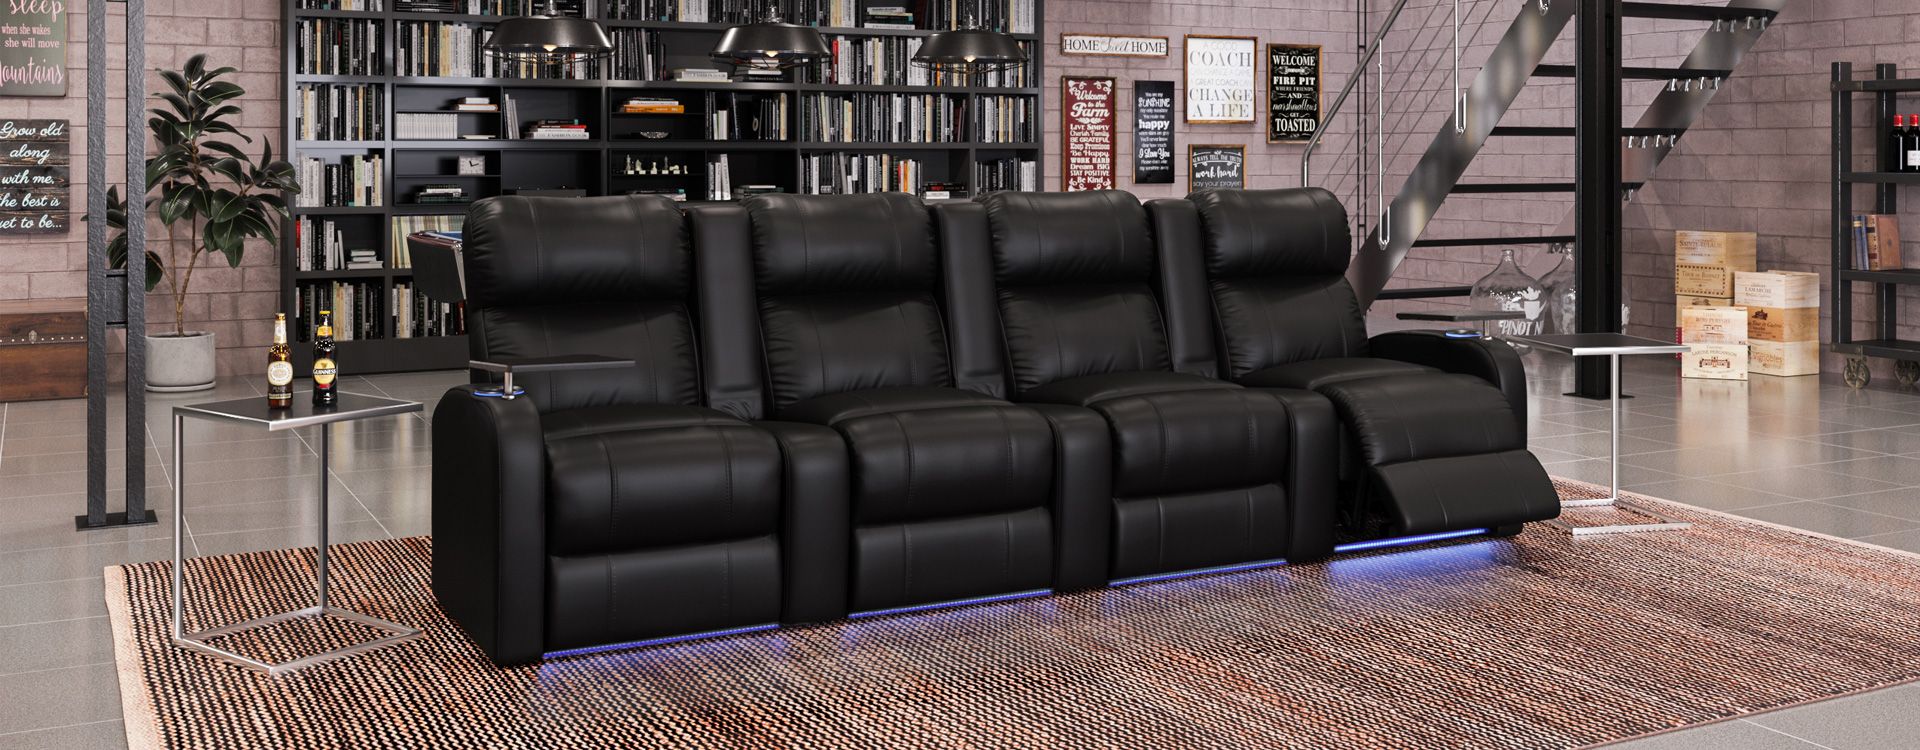 Black Top Grain Leather Memory Foam Power Recline Straight Row 4 Chairs with Loveseat Stealth XL450 Theater Seats